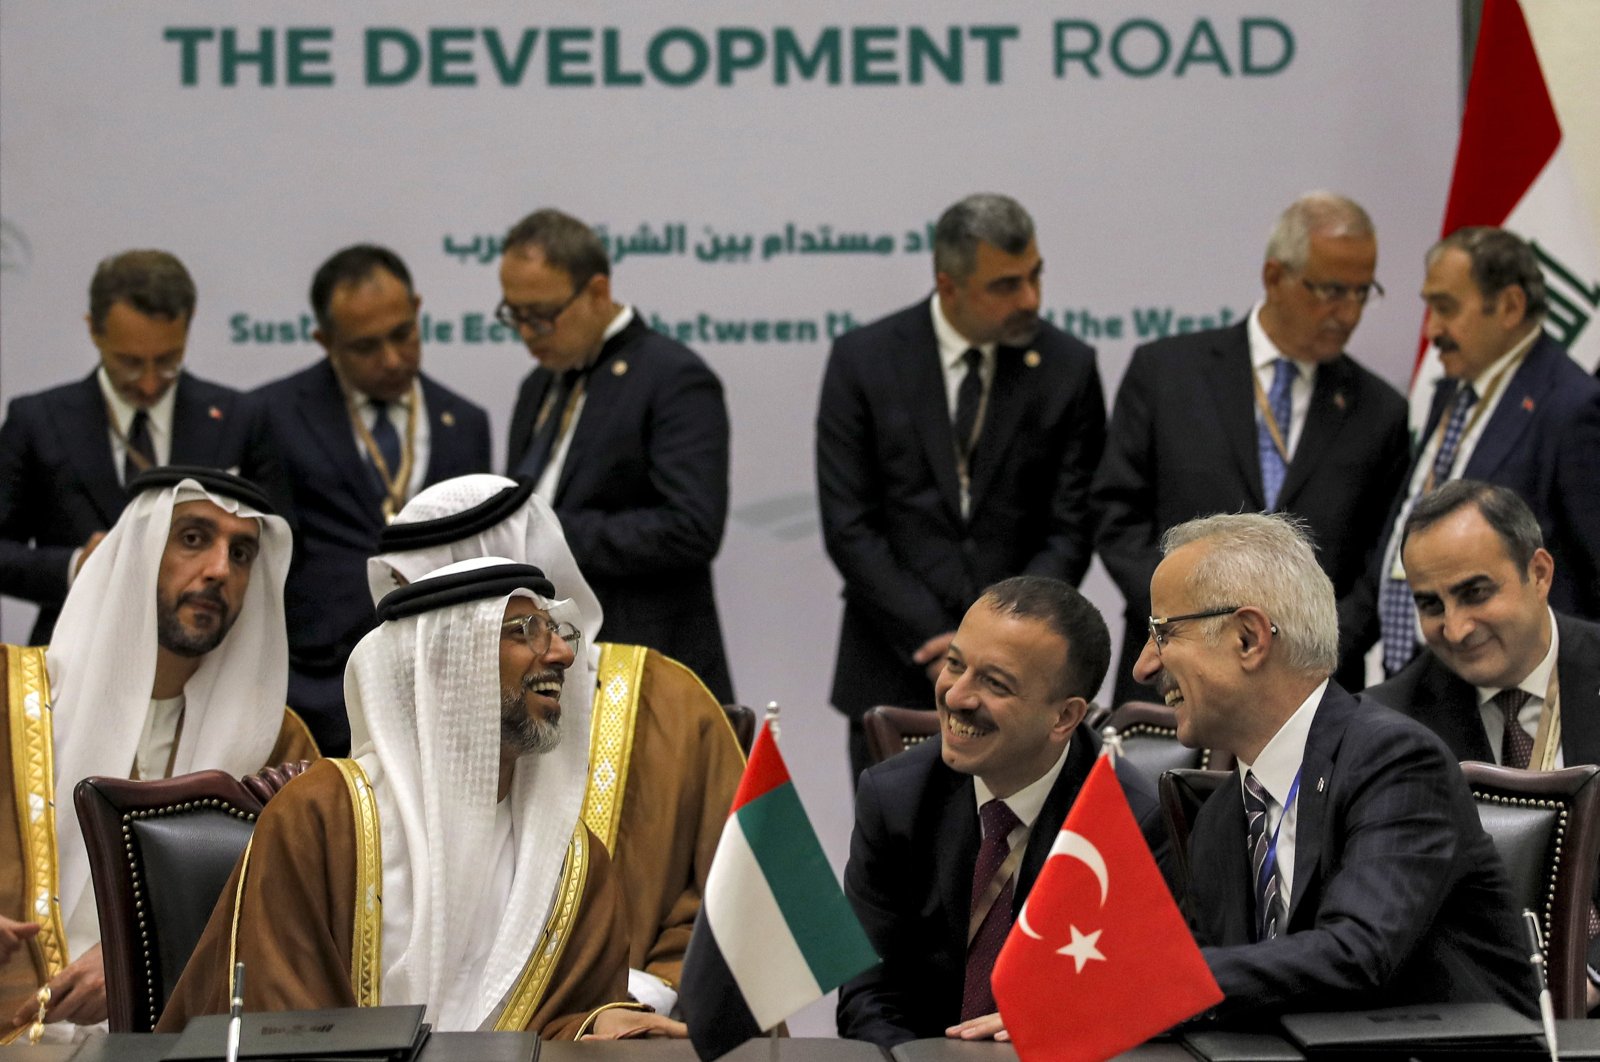 UAE Energy Minister Suhail Mohamed al-Mazrouei (L) and Transport and Infrastructure Minister Abdulkadir Uraloglu (R) speak during the signing of the Development Road framework agreement on security, economy and development, Baghdad, Iraq, April 22, 2024. (EPA Photo)